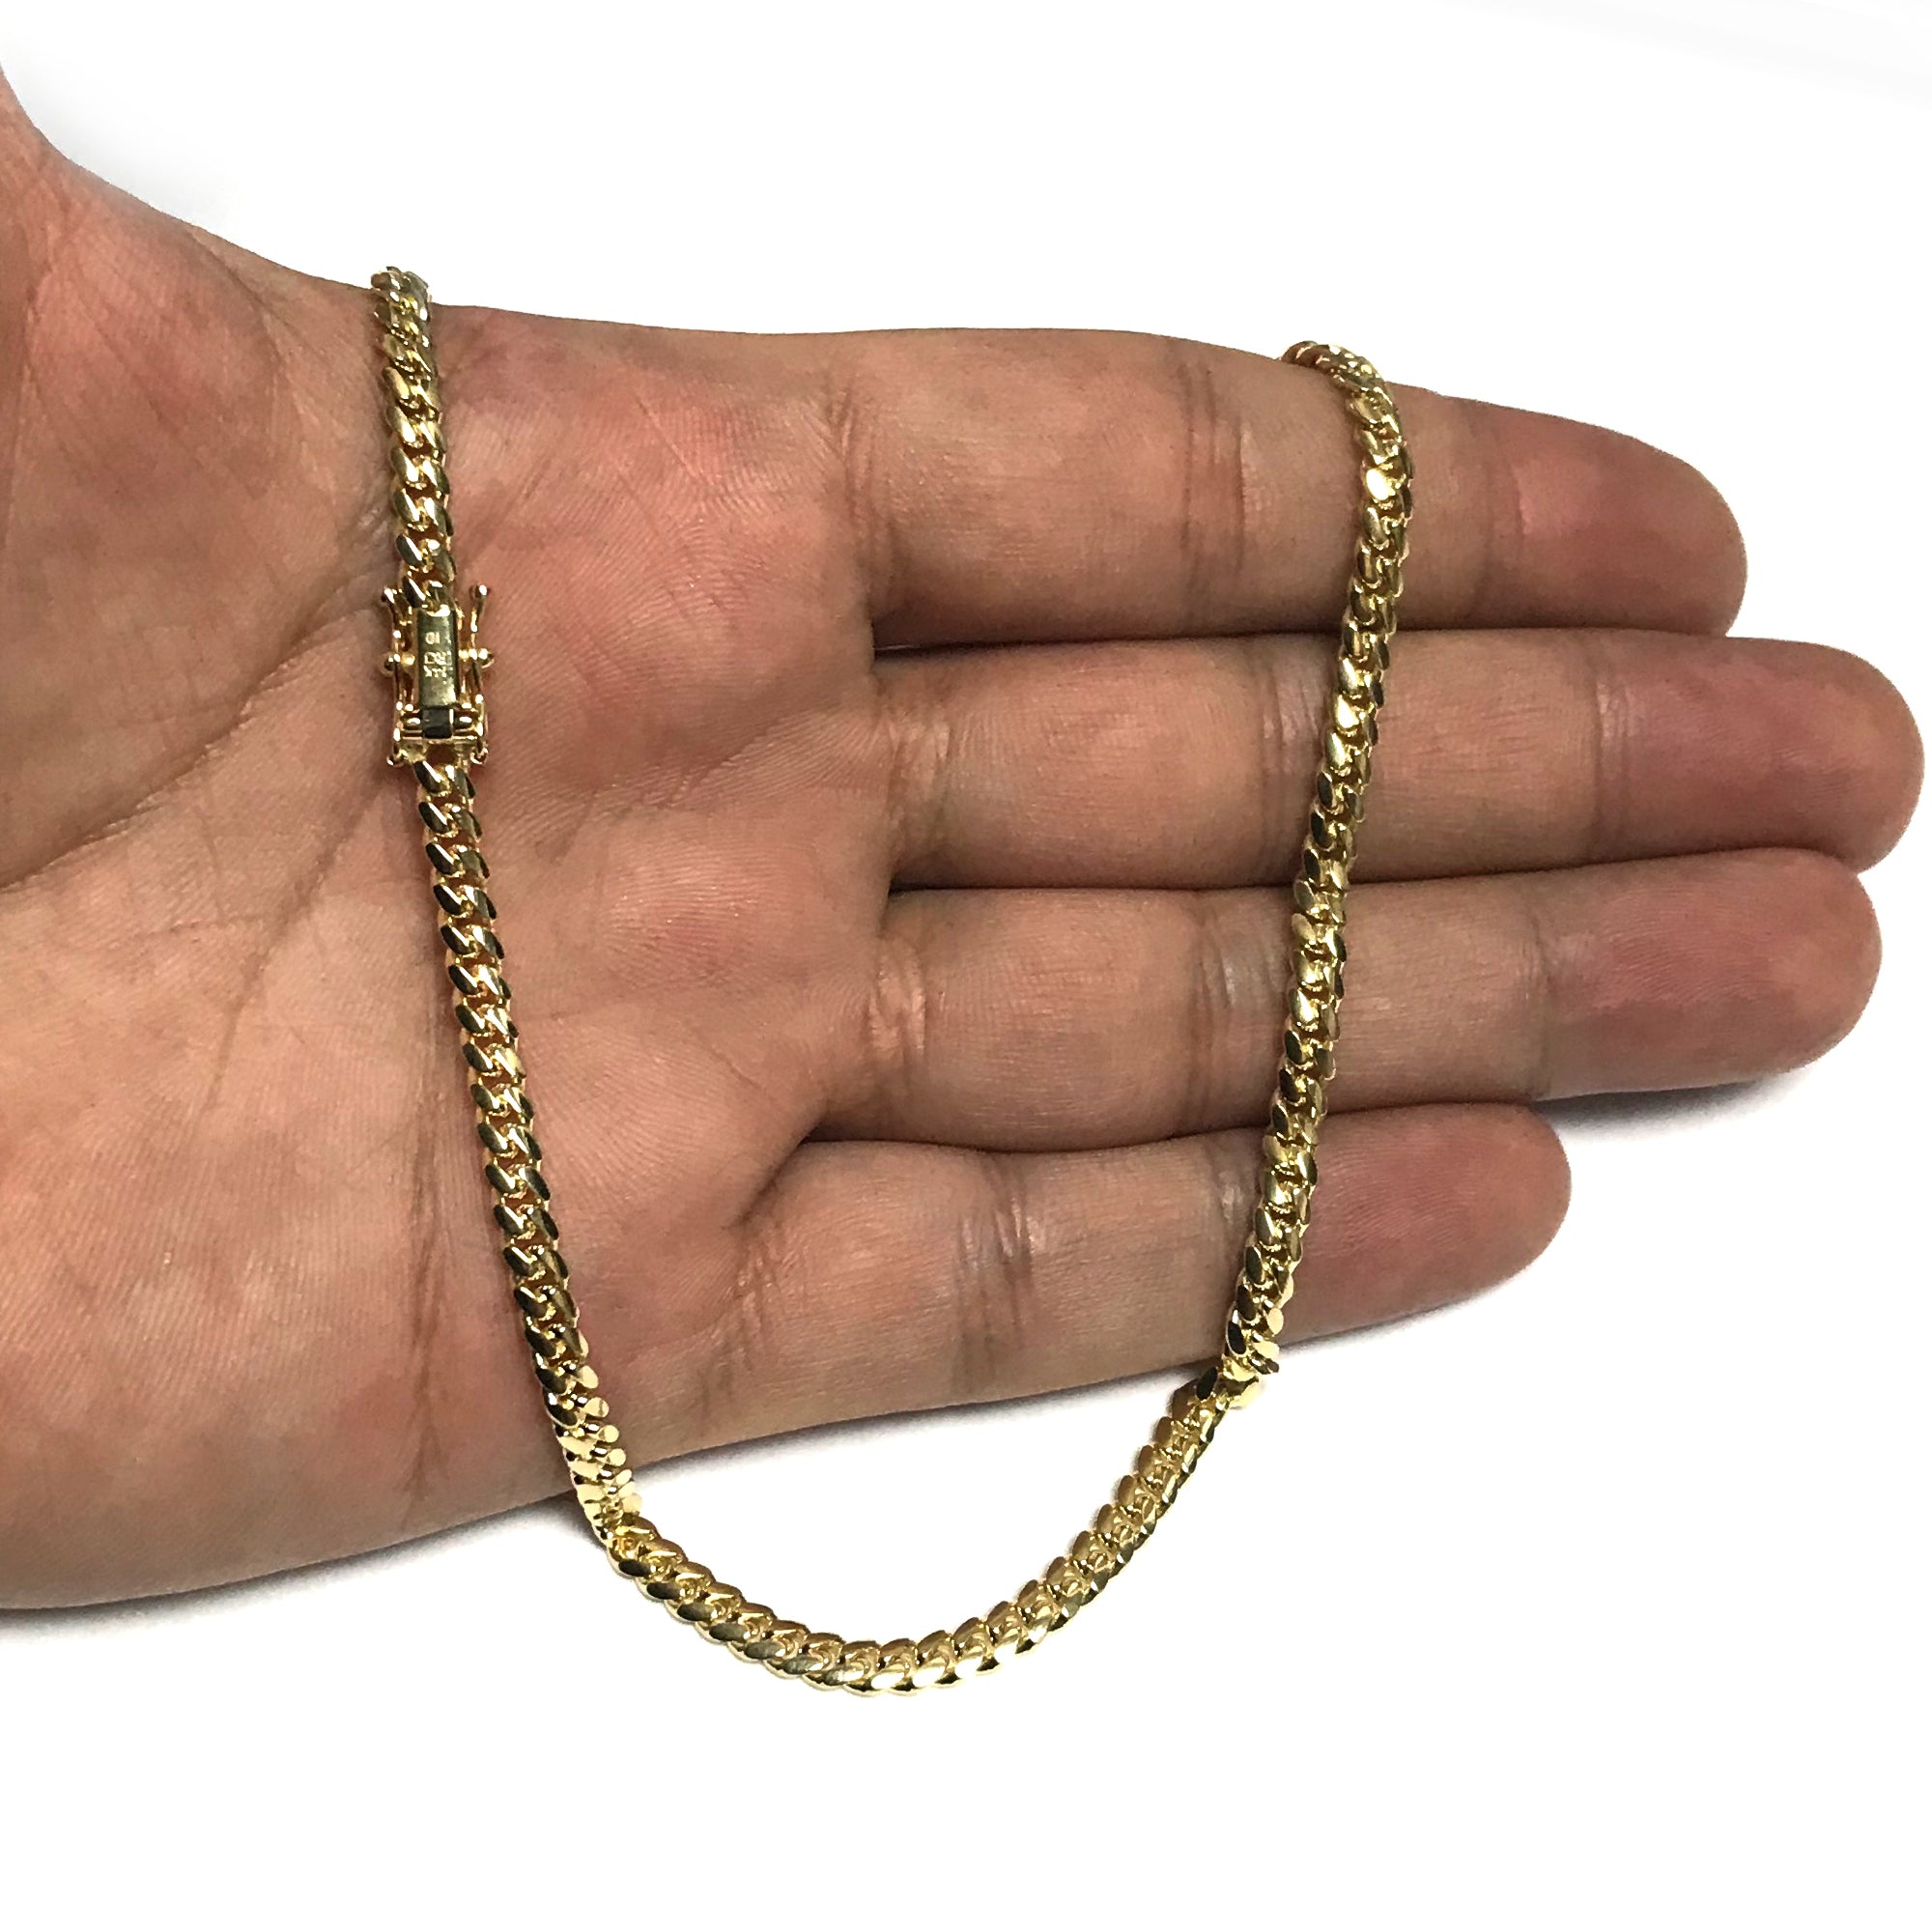 14k Yellow Gold Miami Cuban Link Chain Necklace, Width 4mm